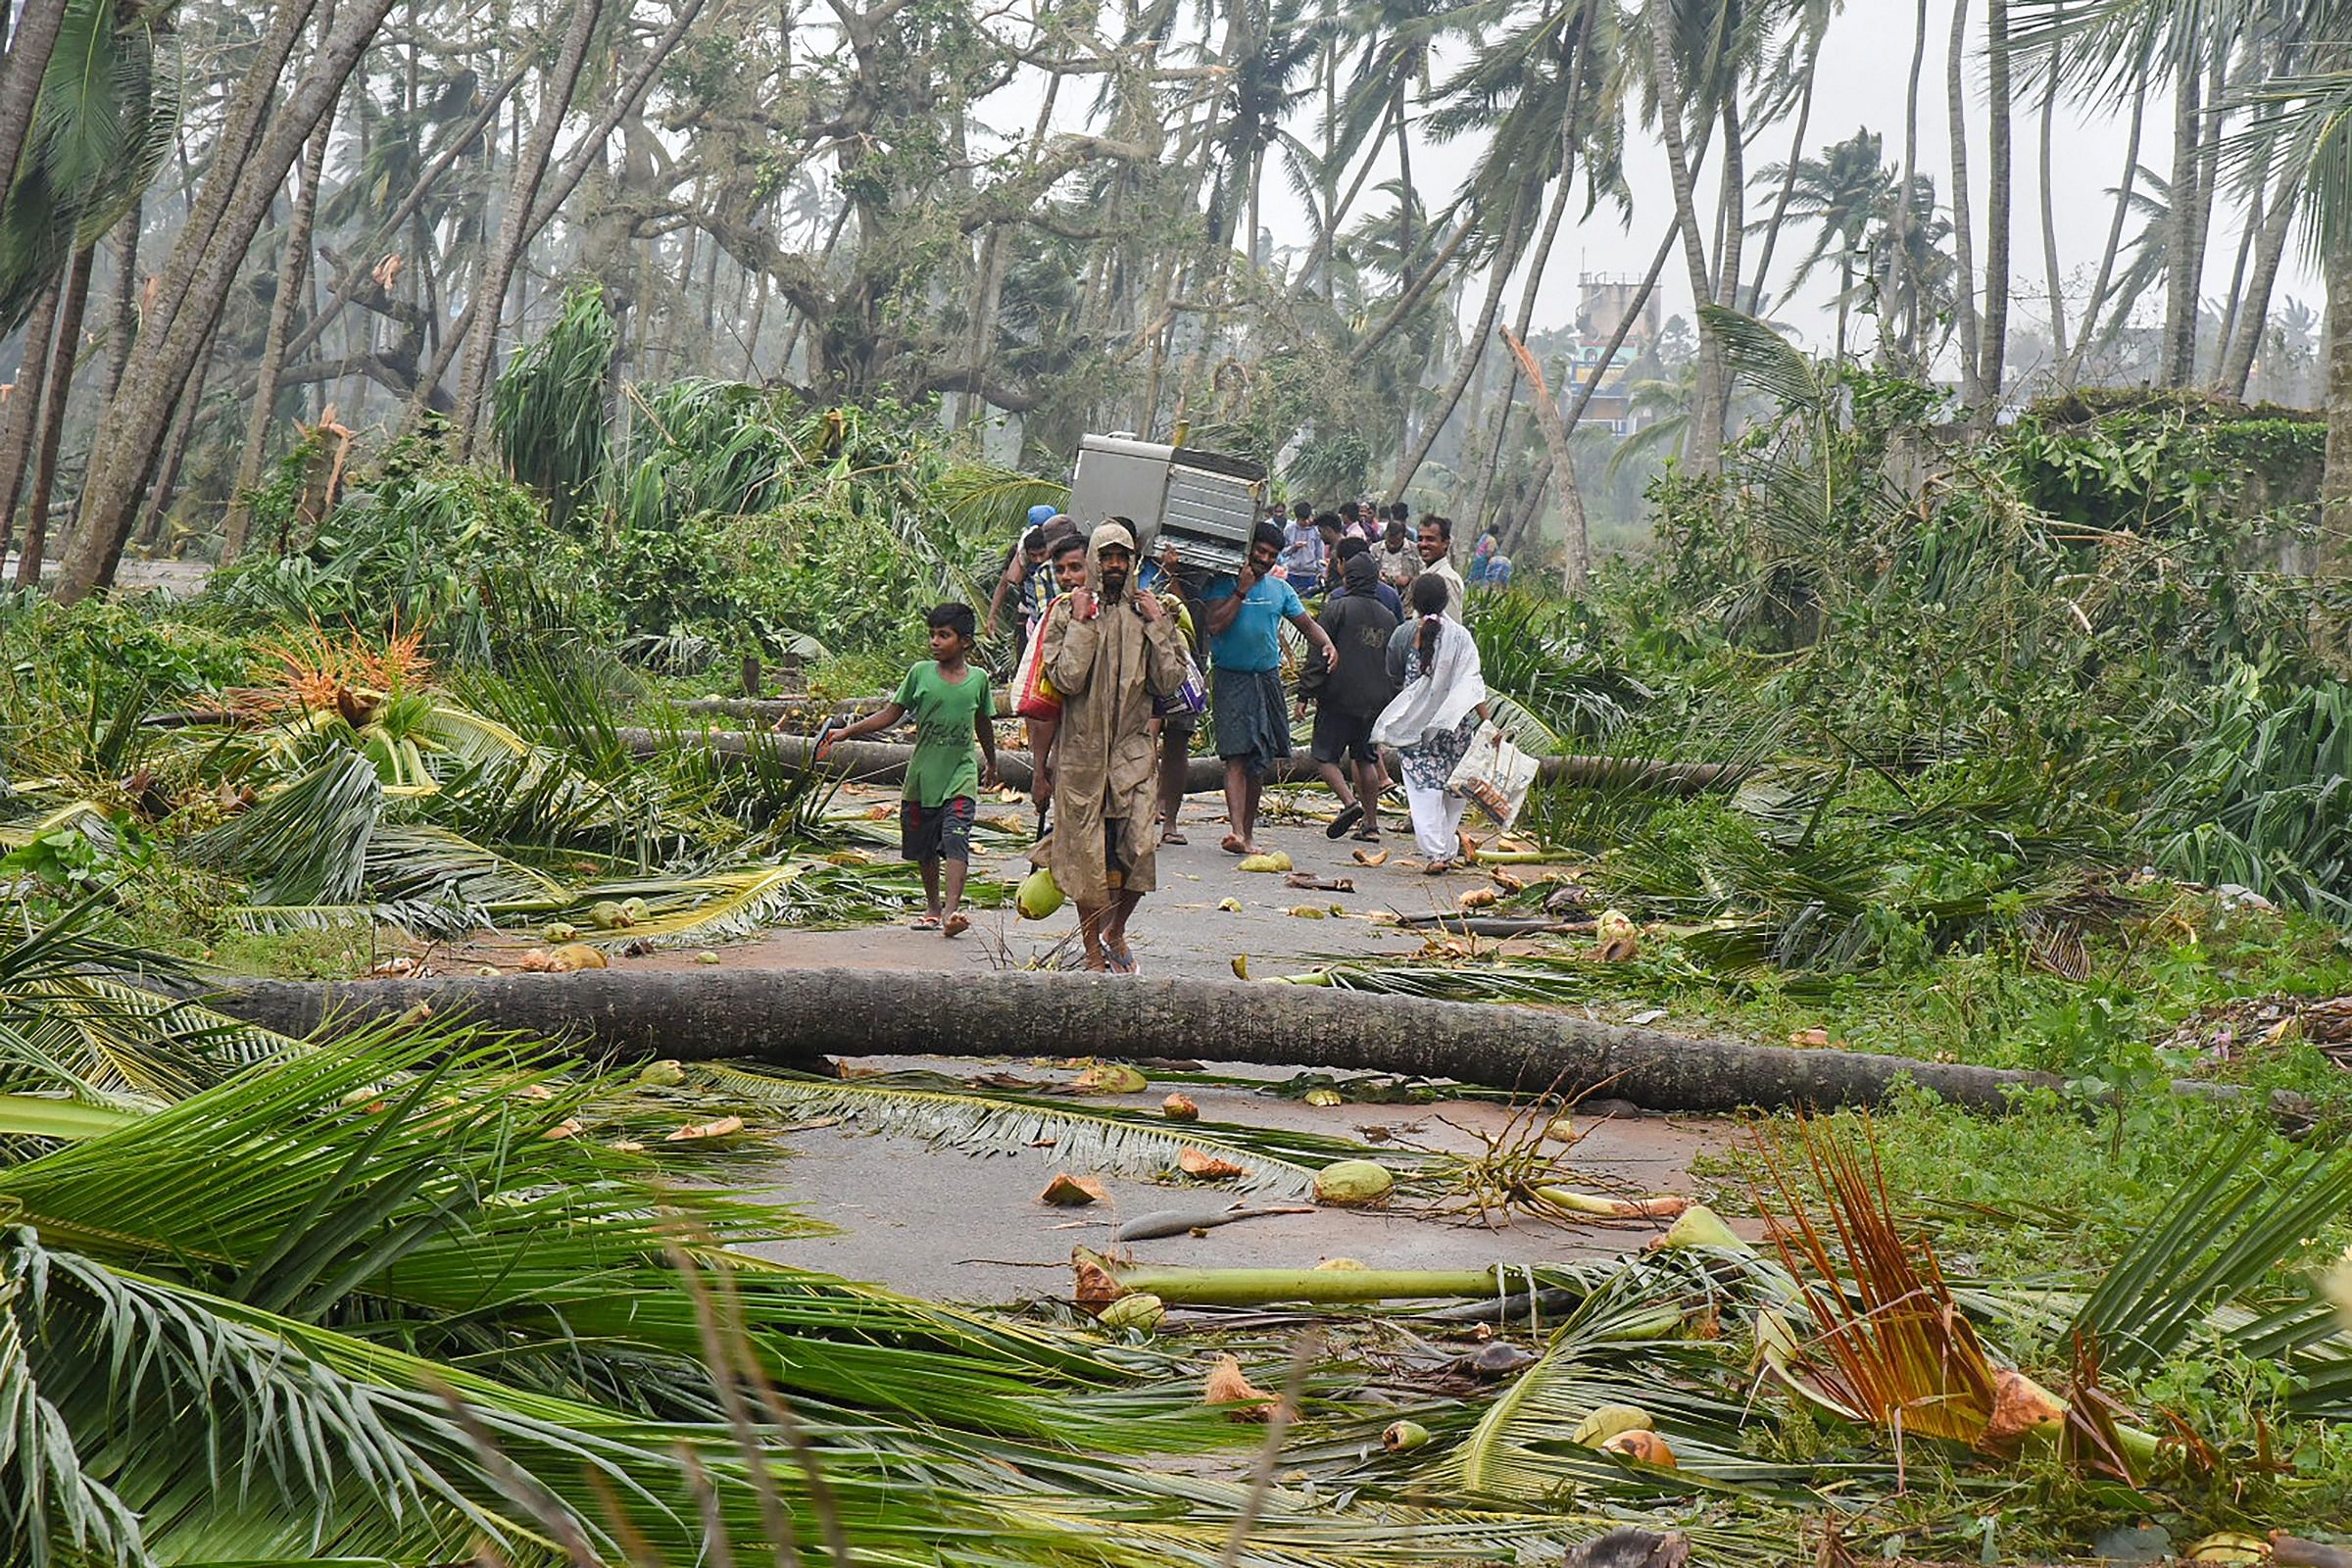 A group of people relocate to safer places as Cyclone Titli hits Barua village, in Srikakulam, on October 11, 2018. PTI file photo